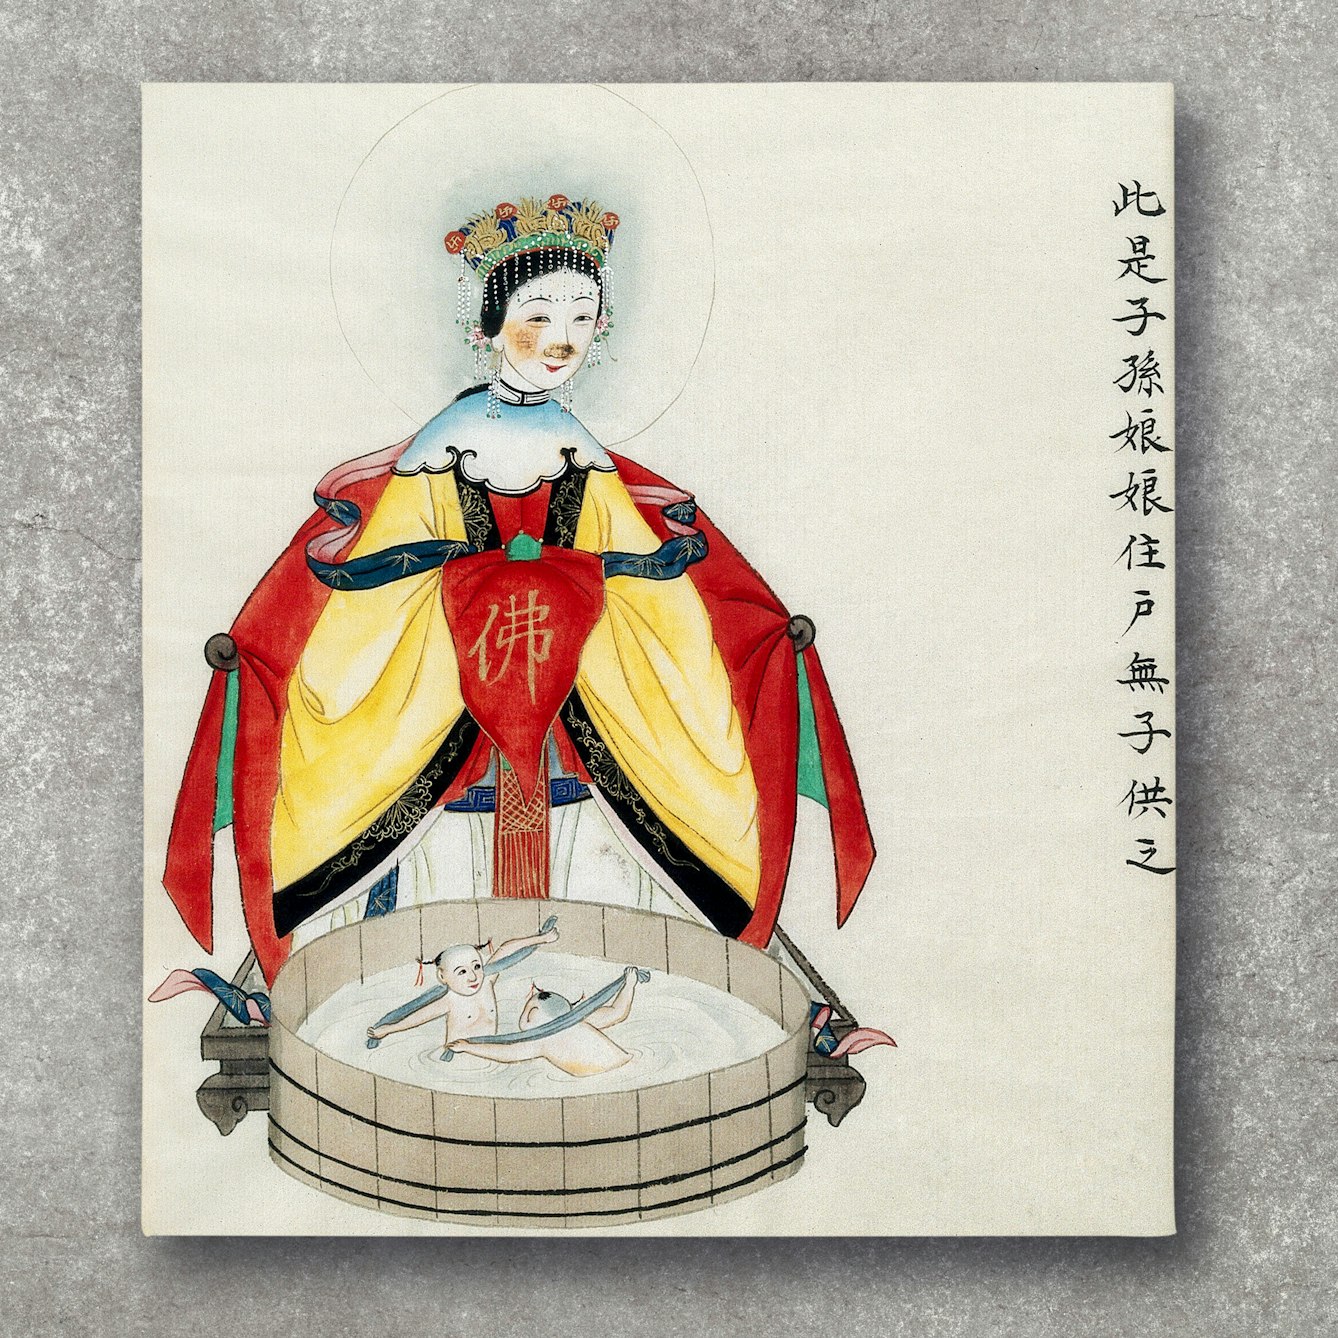 A 19th century watercolour image of Zi Sunliang, a Chinese goddess. 

She is wearing a cloud collar over a yellow and red robe and a crown. On the robe, at her chest, there is a red pendant with writing on it. 

She is looking down. At her feet there is a wooden bath with two babies bathing in it, both holding towels over their shoulders. To the right hand side of the painting there is some vertical writing.

The watercolour painting is resting on a grey background. 